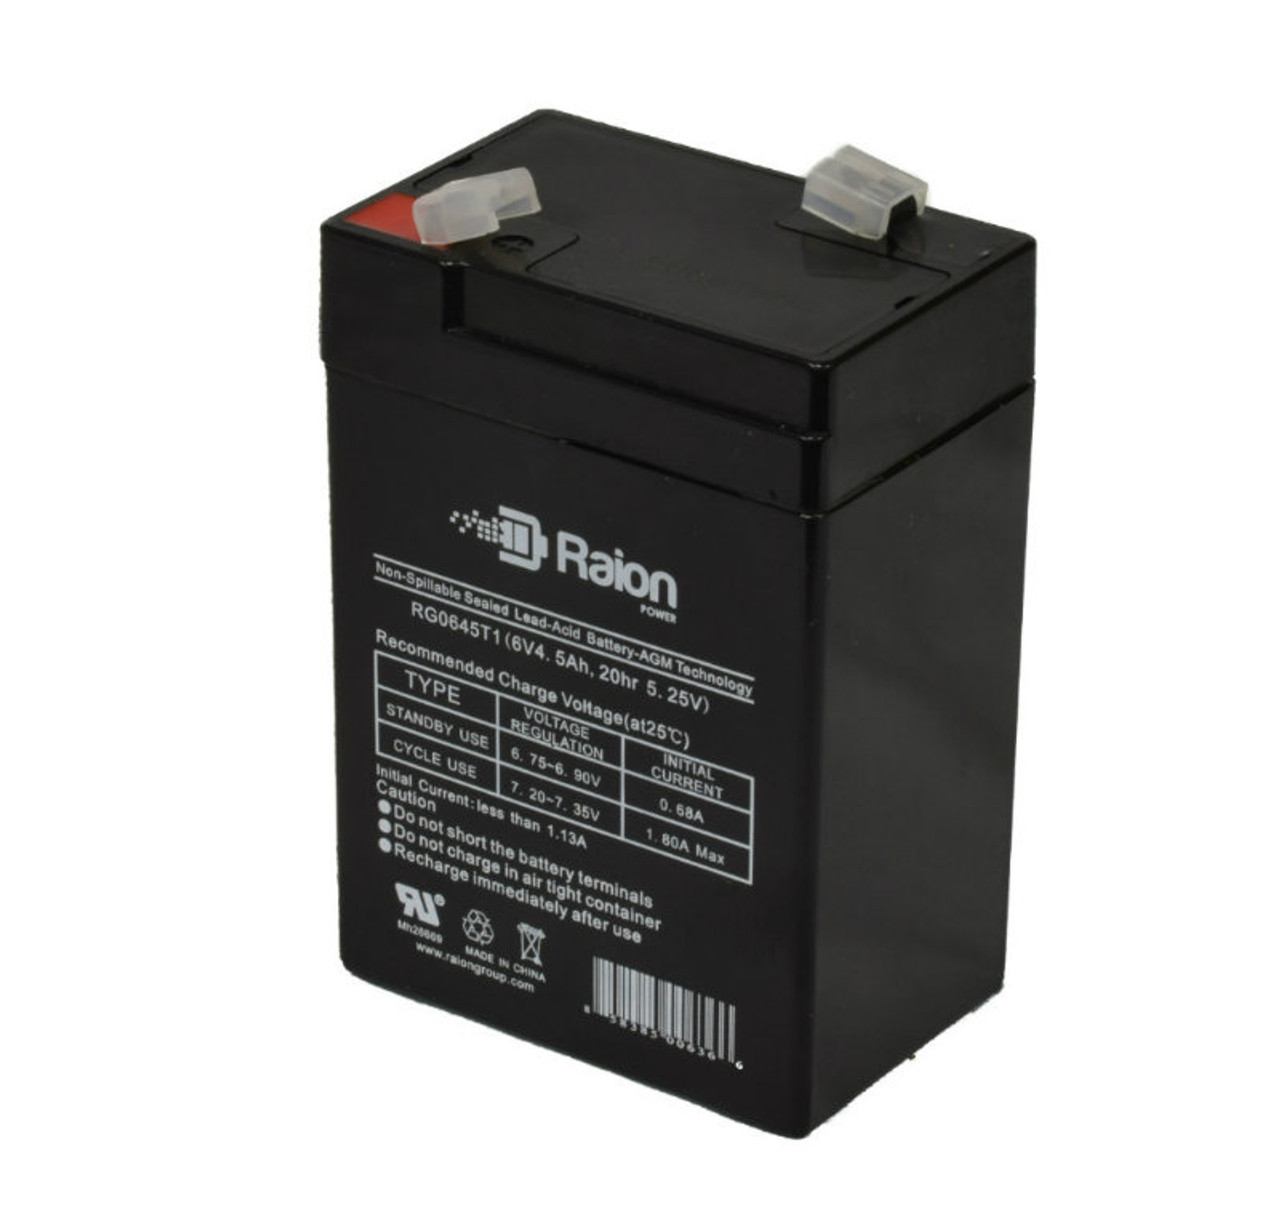 Raion Power RG0645T1 6V 4.5Ah Replacement Battery Cartridge for Philips Medical Systems A-1 BP Monitor (M3923A)